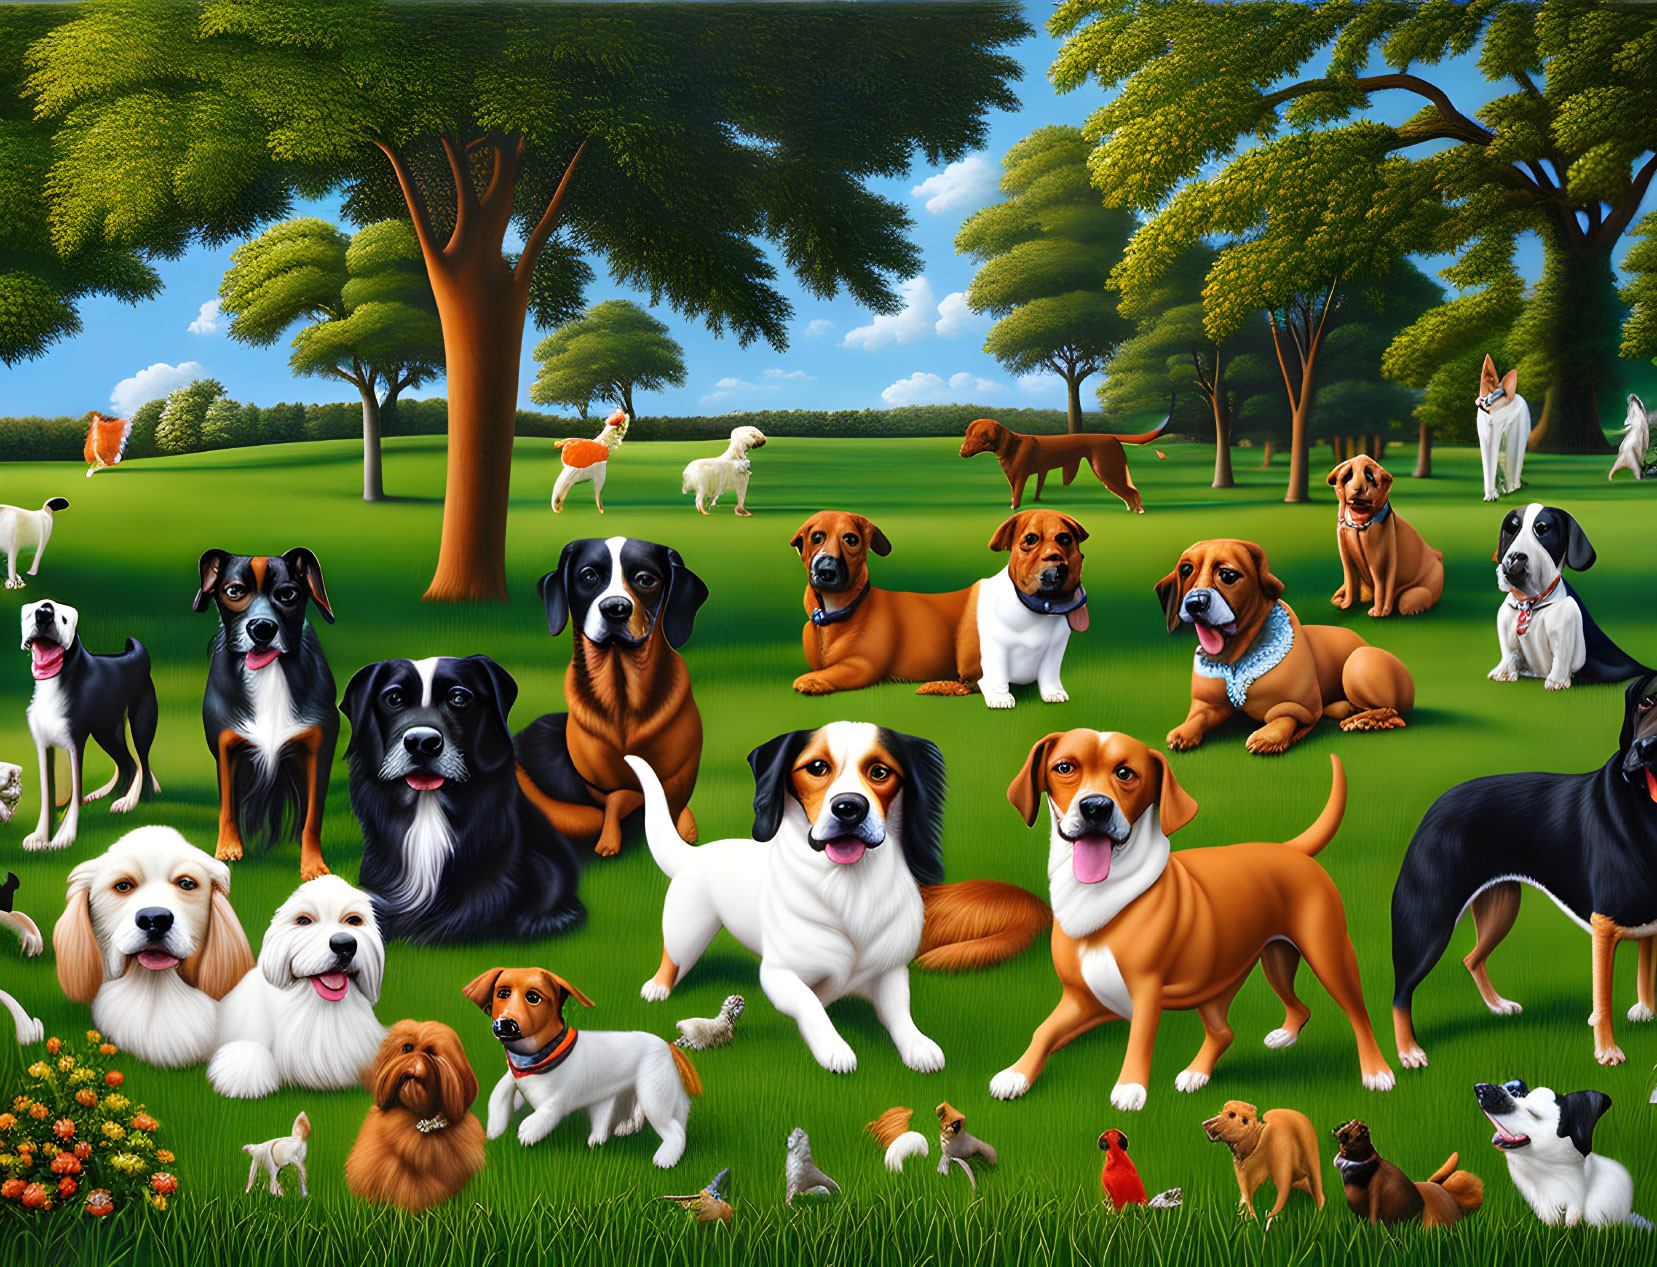 Colorful Dog Breeds in Park Setting with Trees & Blue Sky